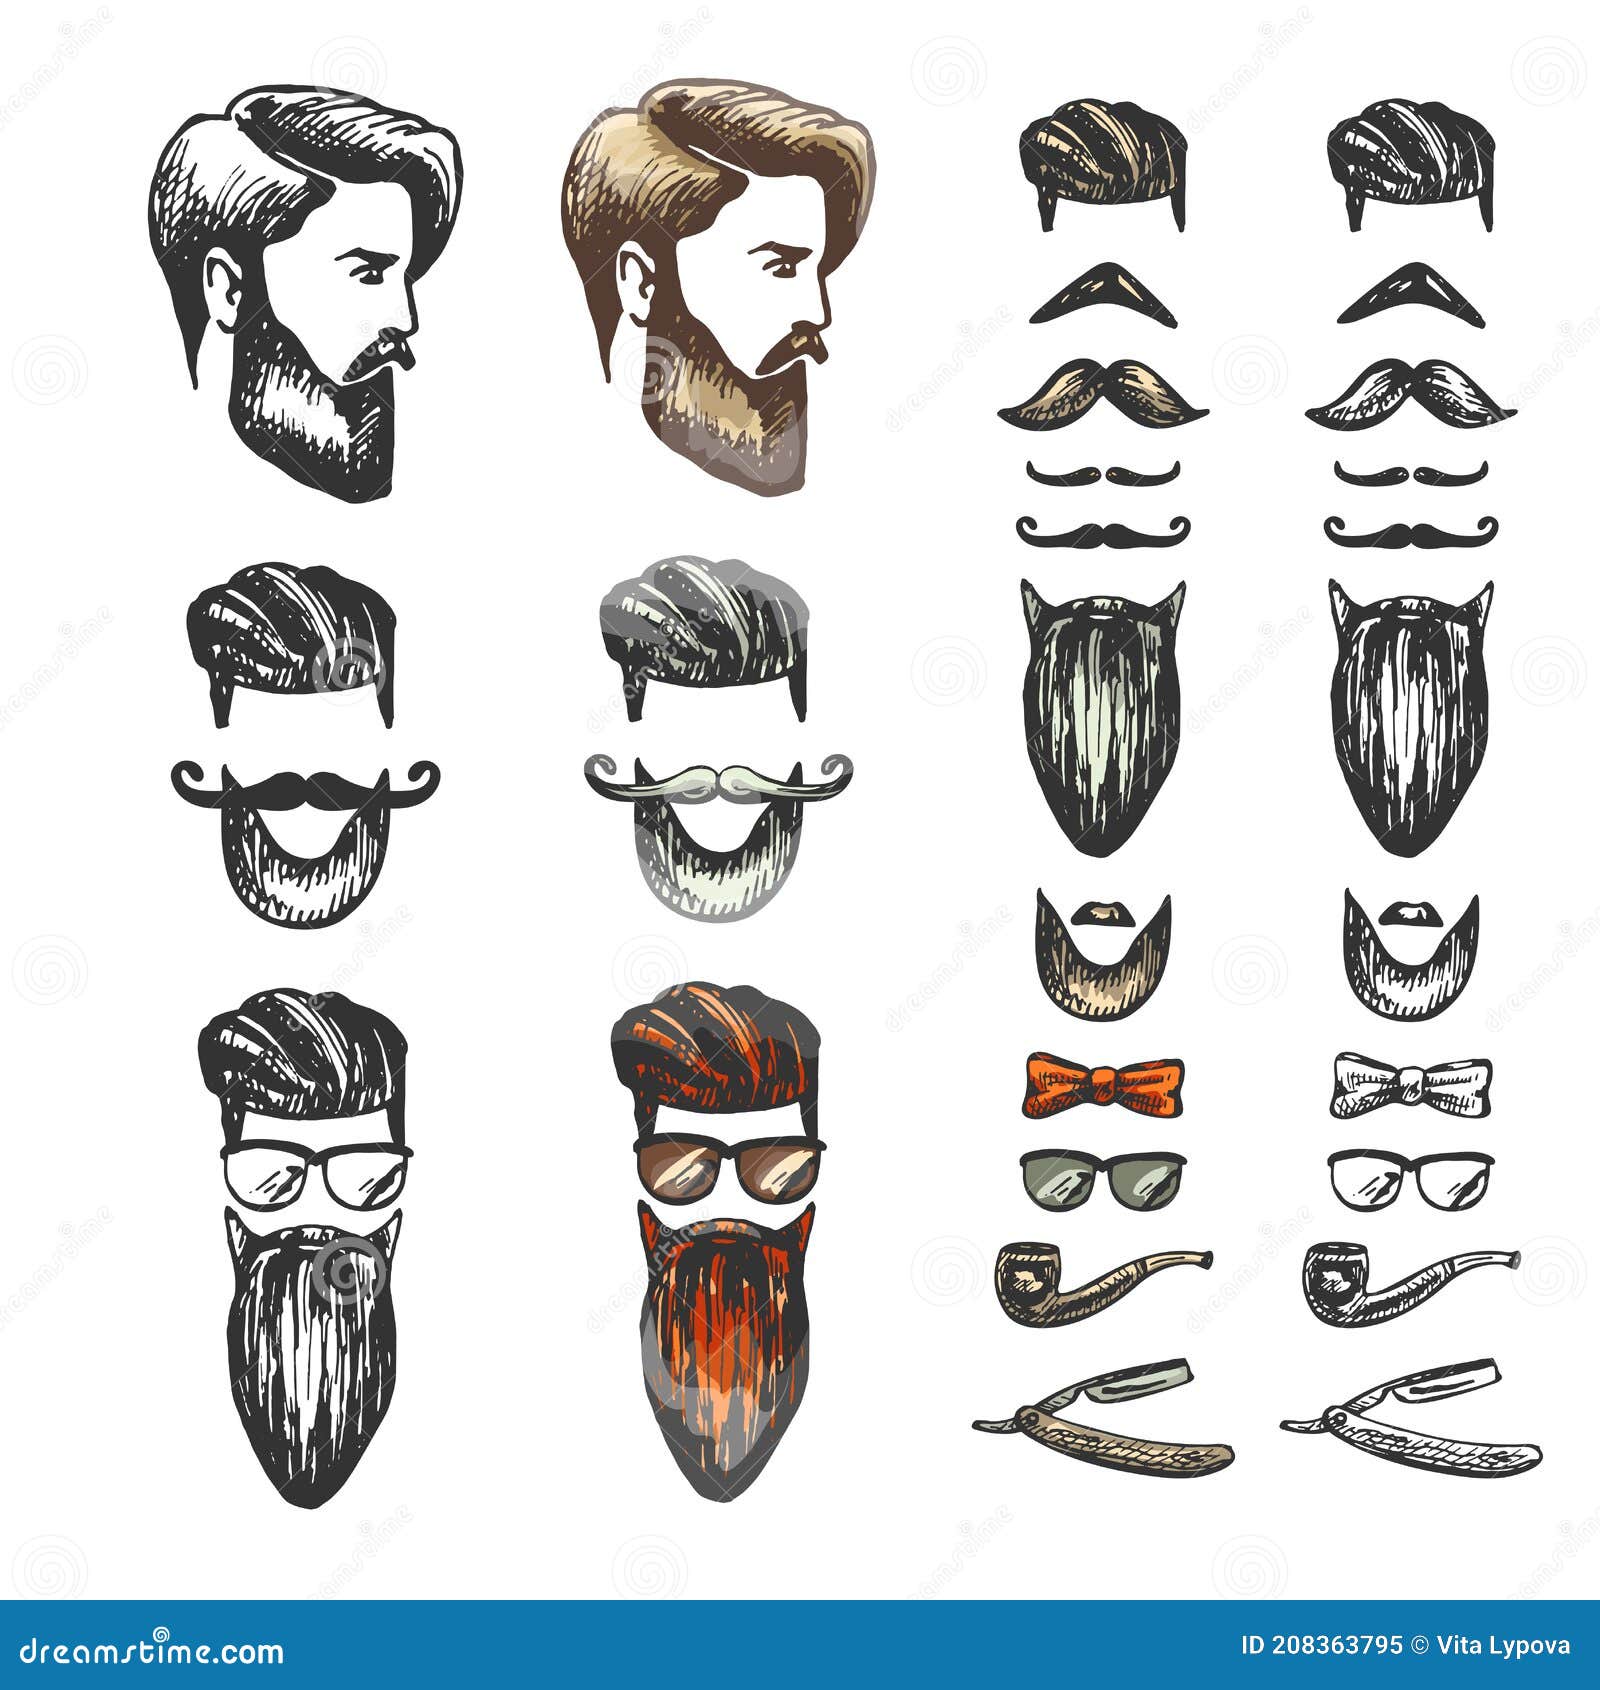 Hair, Beard, Hairstyle, Mustache, Glasses, Tie, Set of Male Stylish Images  Stock Vector - Illustration of collection, grayhaired: 208363795